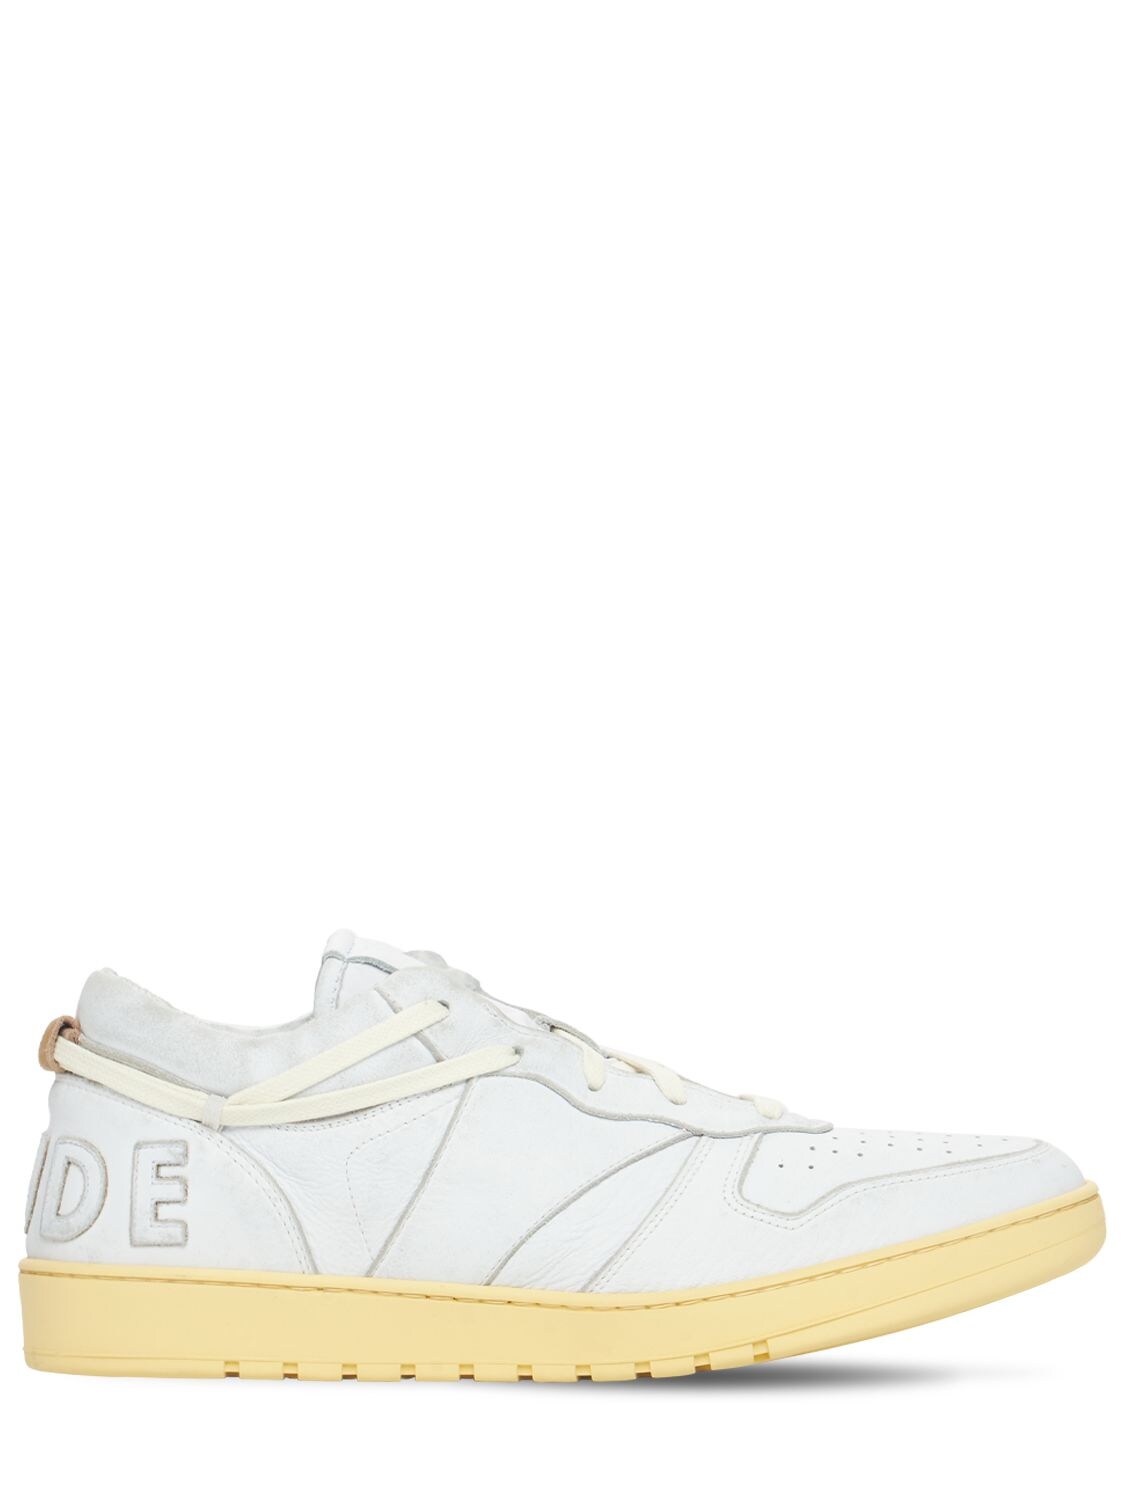 RHUDE RHECESS LEATHER LOW TOP trainers,73IY3Q006-MDQZNG2